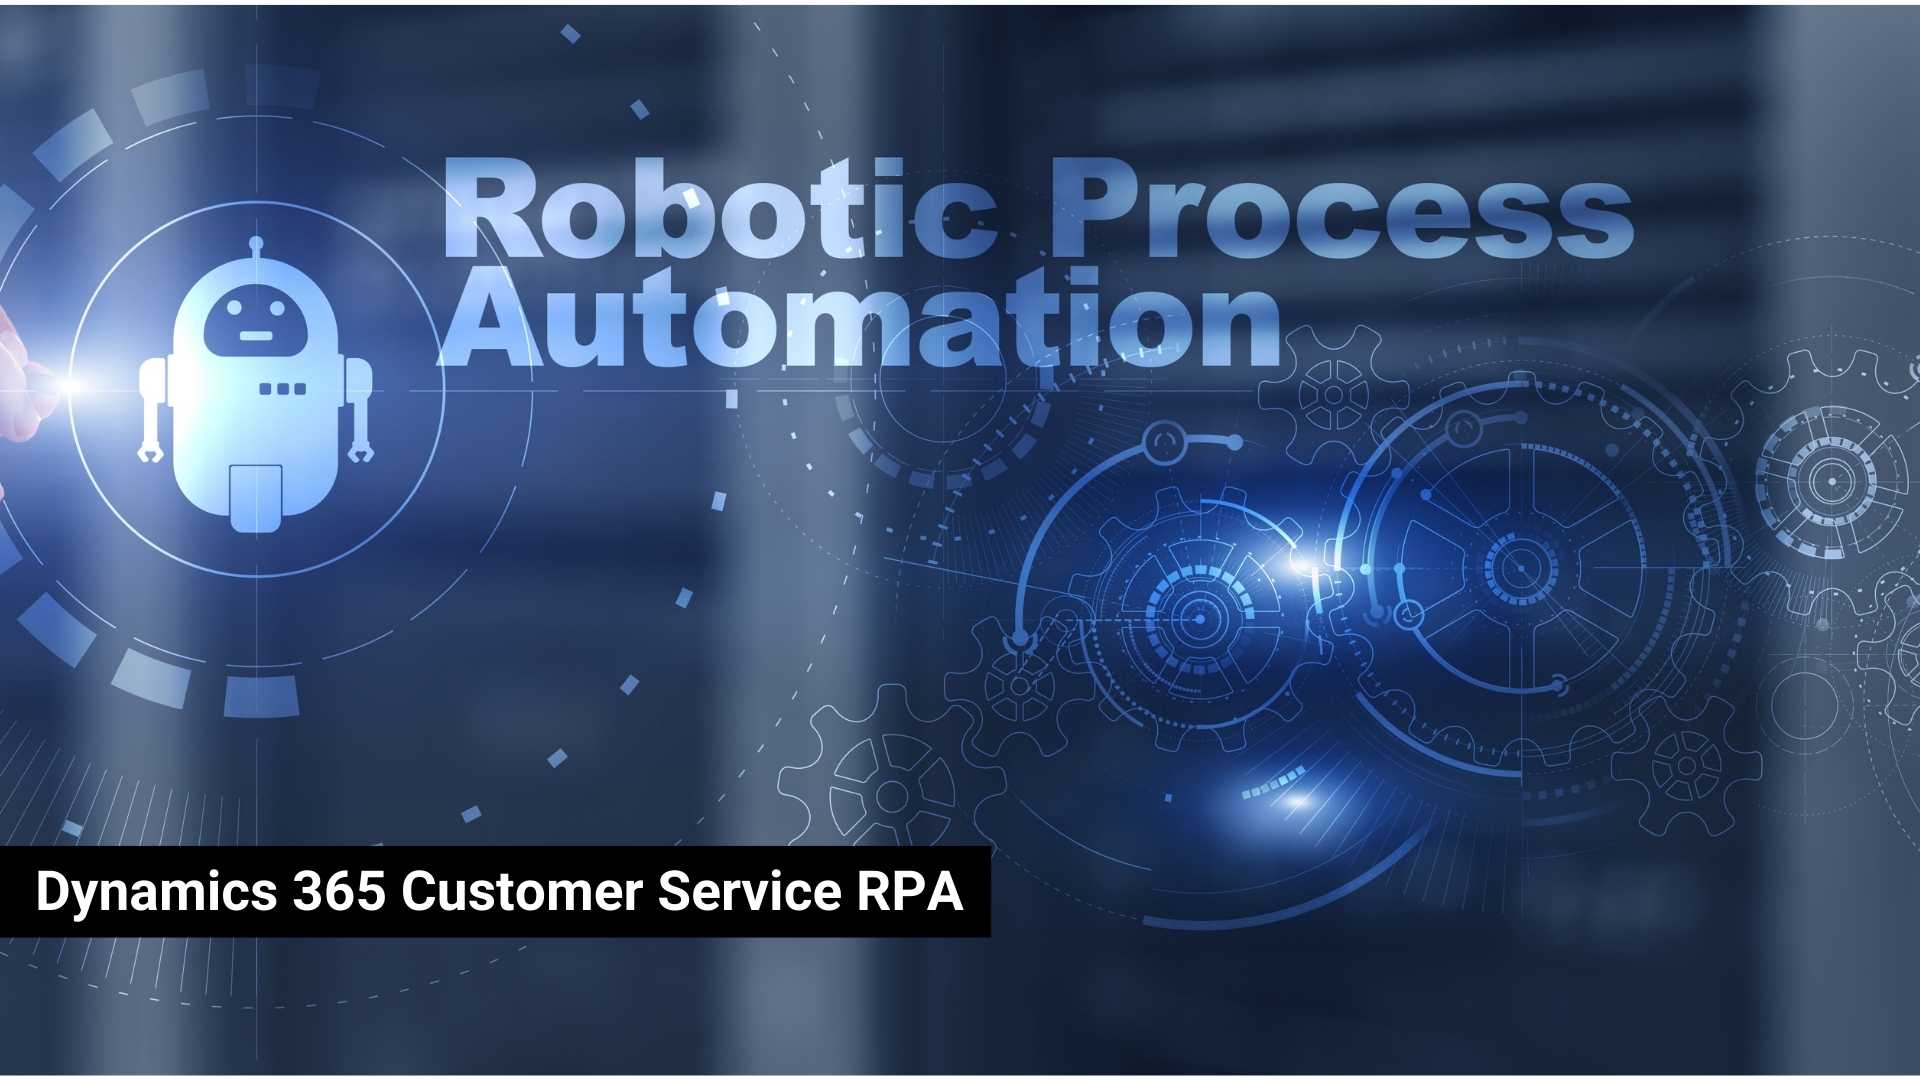 Dynamics 365 Customer Service RPA To Get the Most Out of Your CRM Solution